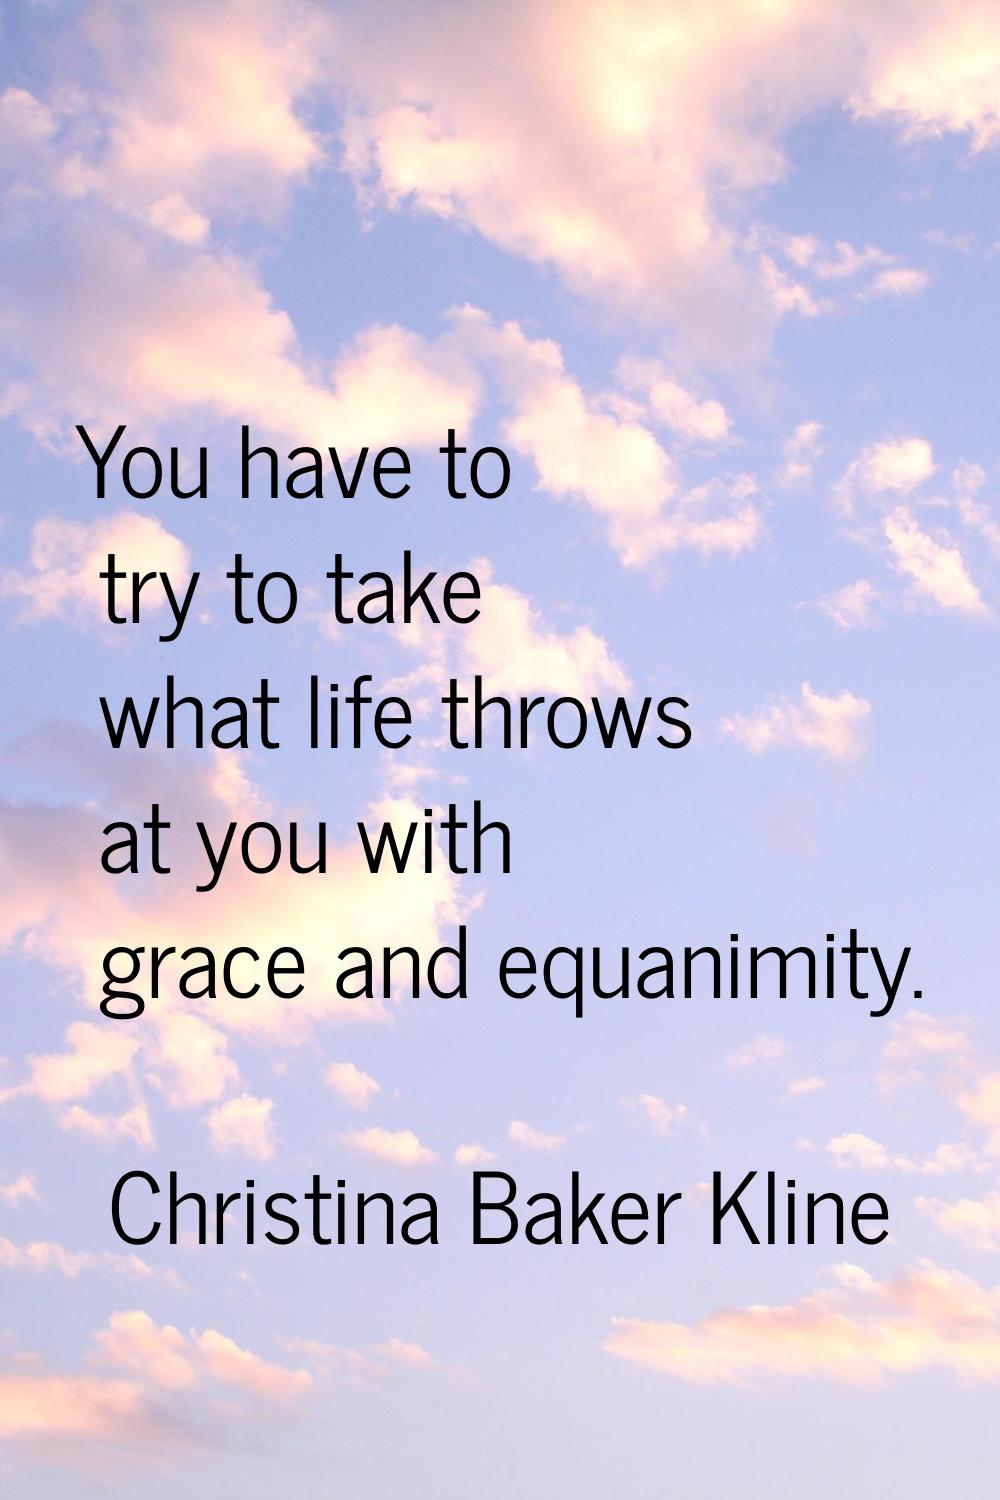 You have to try to take what life throws at you with grace and equanimity.